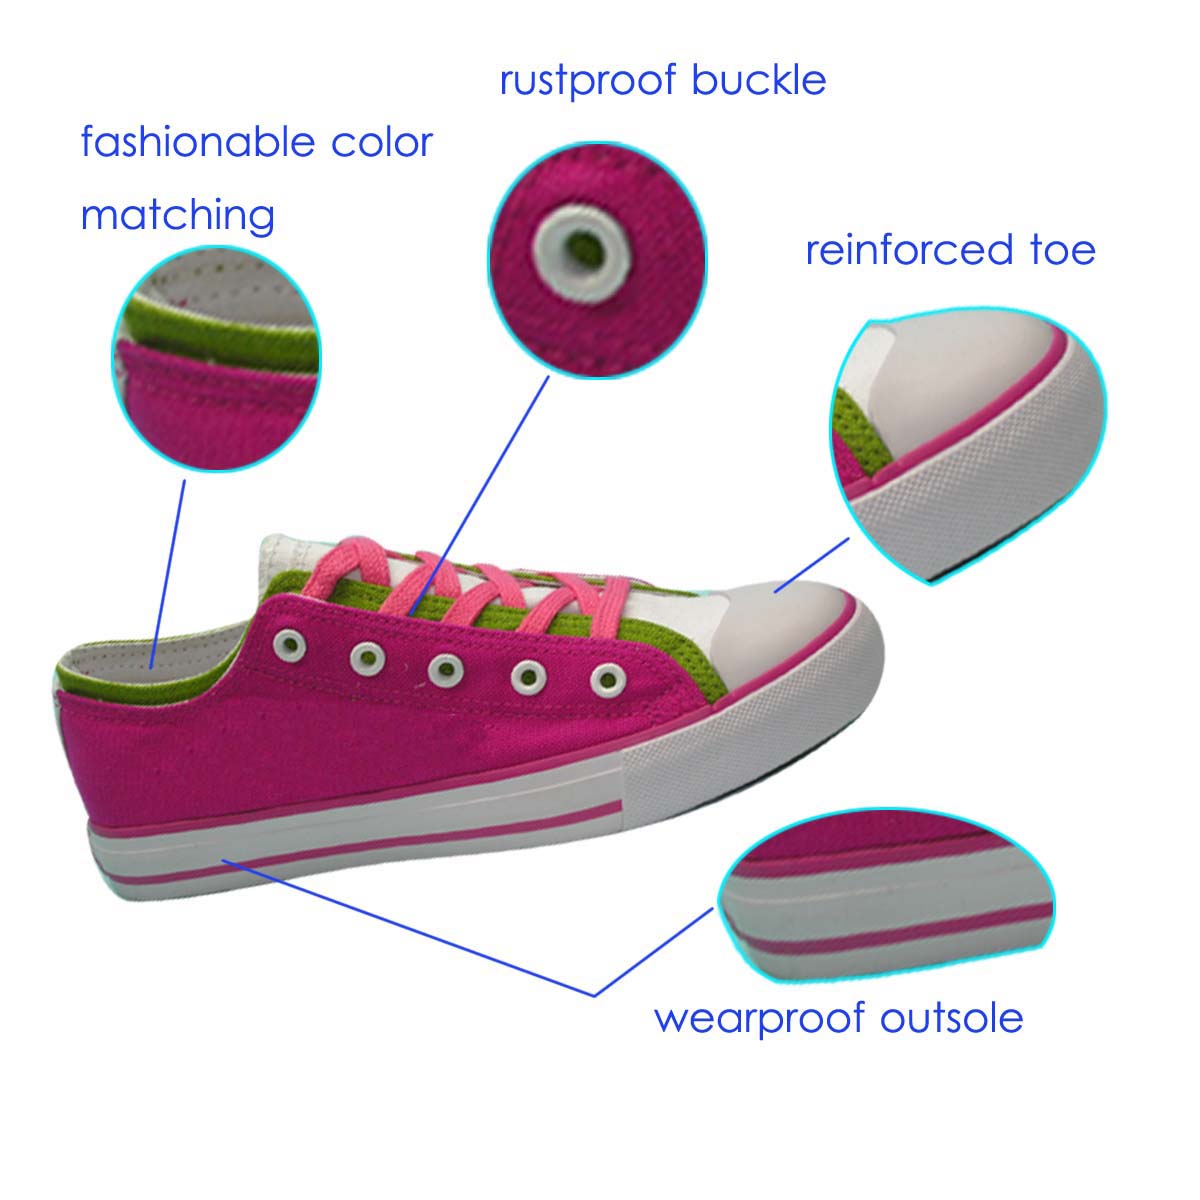 Hottest Female/ Woman/ Girl Vulcanized Rubber Sole Walking Canvas Shoes with OEM&amp;ODM Service Available from Chinese Market